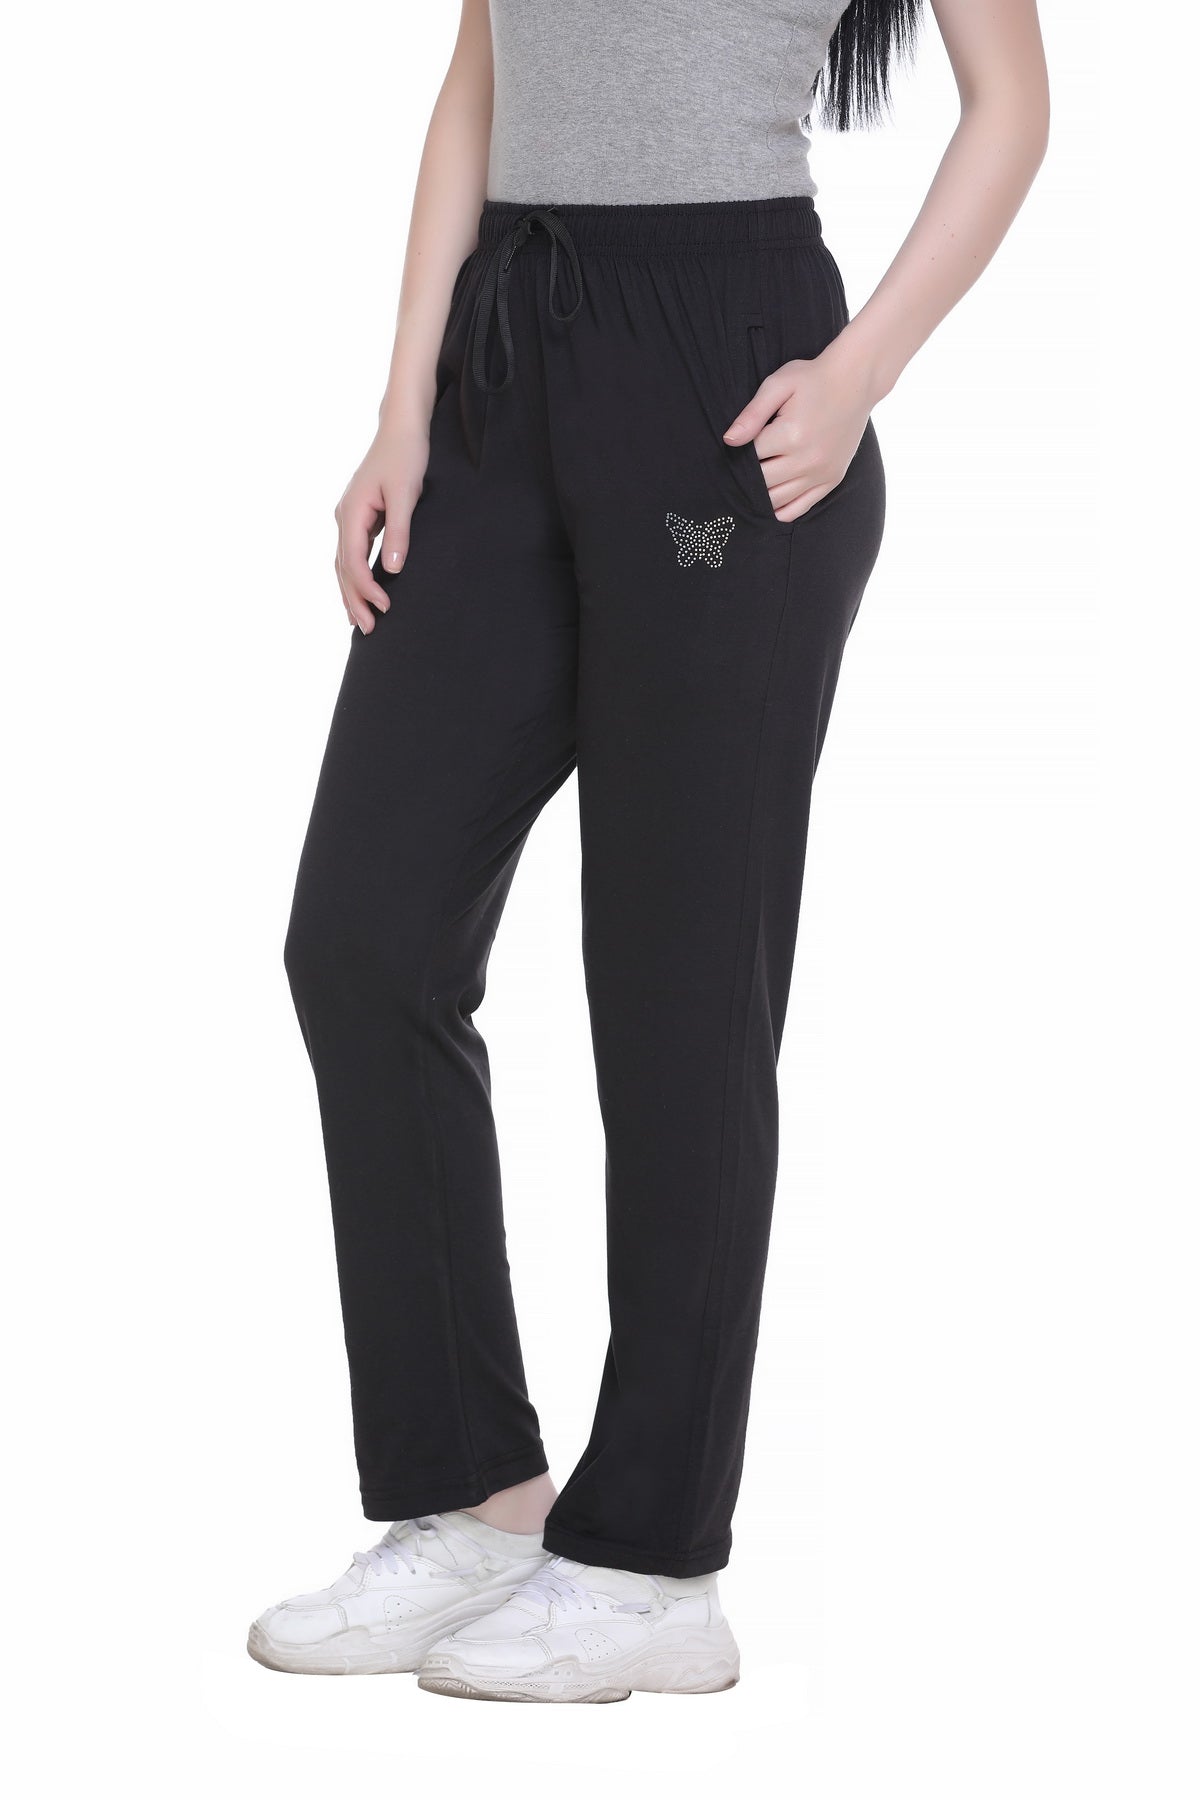 Stylish Cotton Track Pants For Women (Pack of 2) At Best Prices